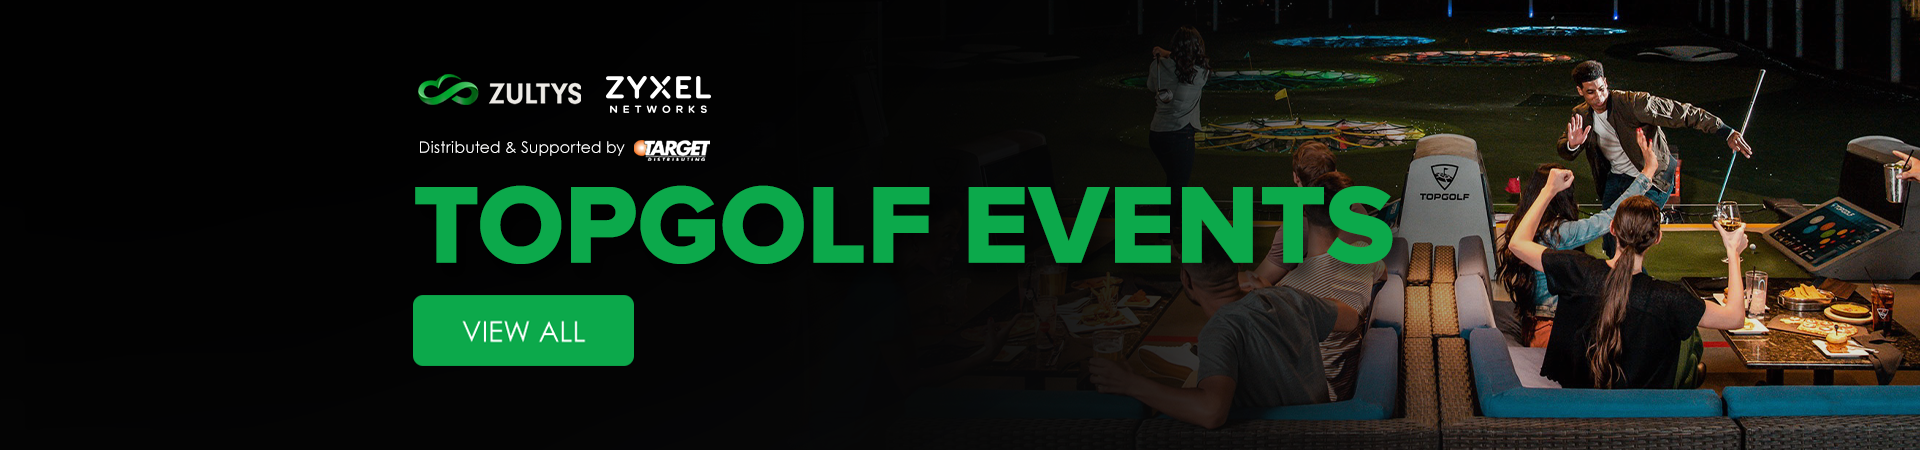 Topgolf Events